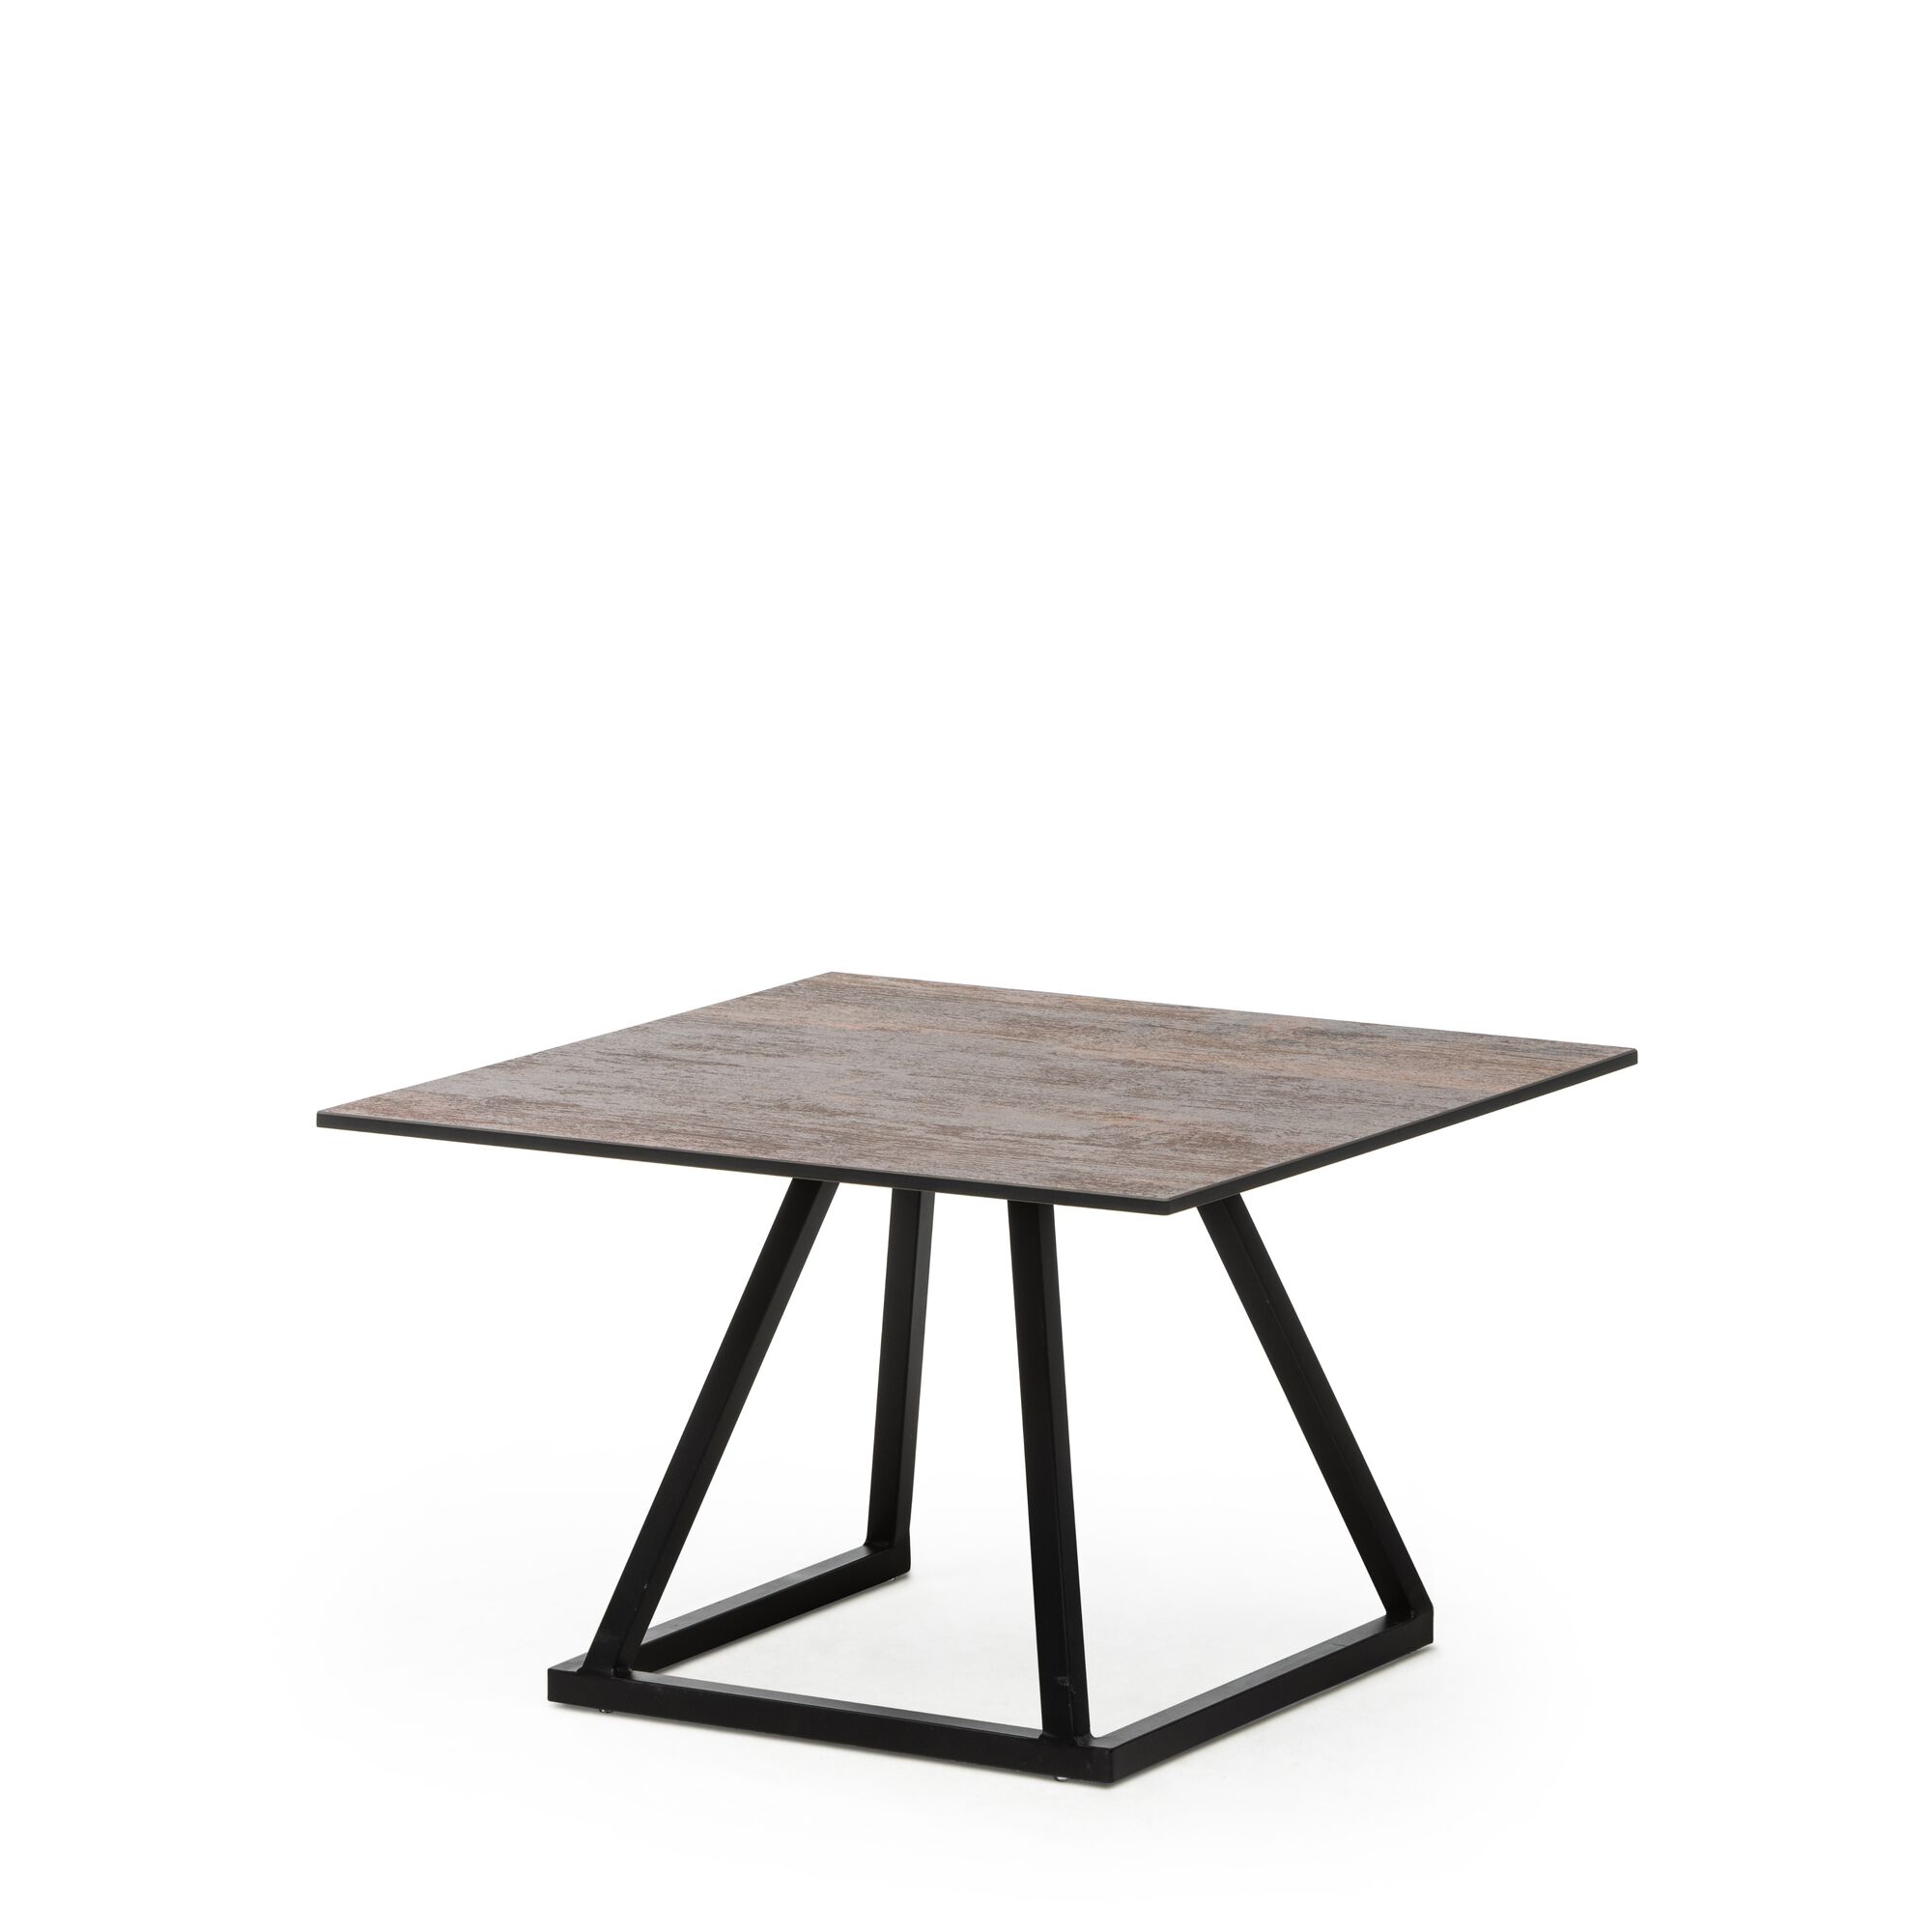 Linea Lounge Table - Stackable